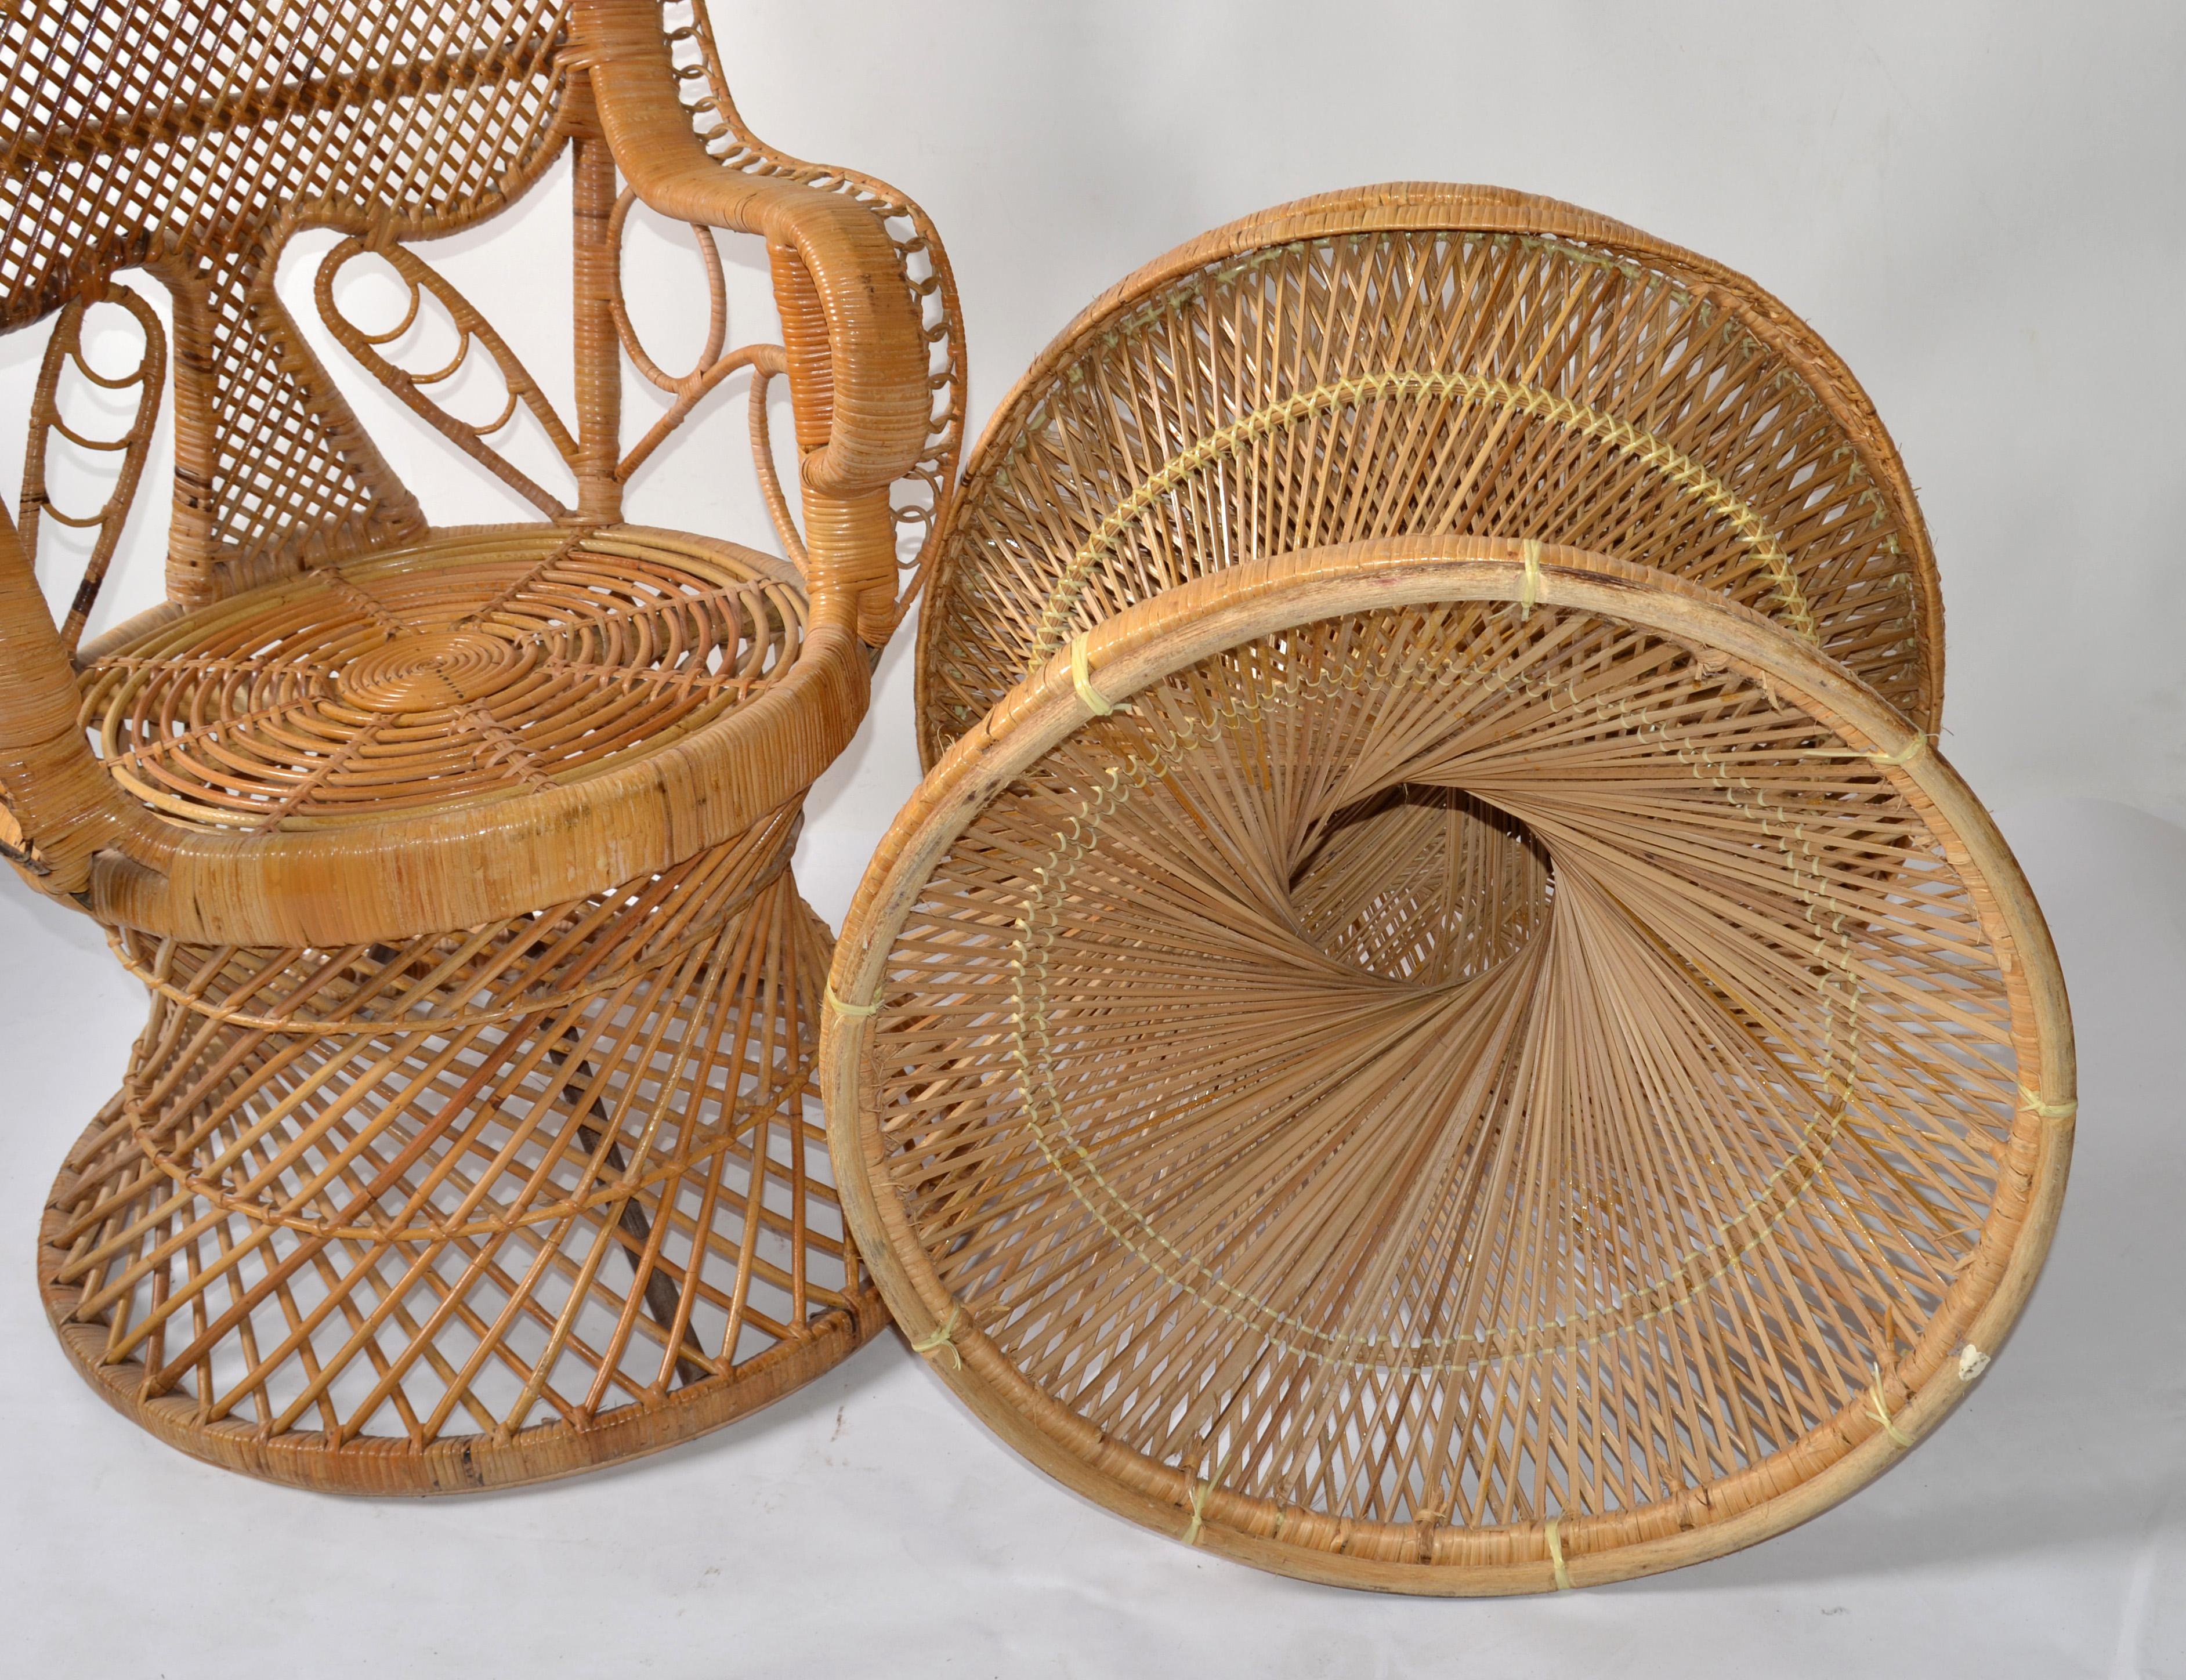 Coastal Vintage Round Rattan Accent Table Hand-Woven Wicker Caning Peacock Chair For Sale 5